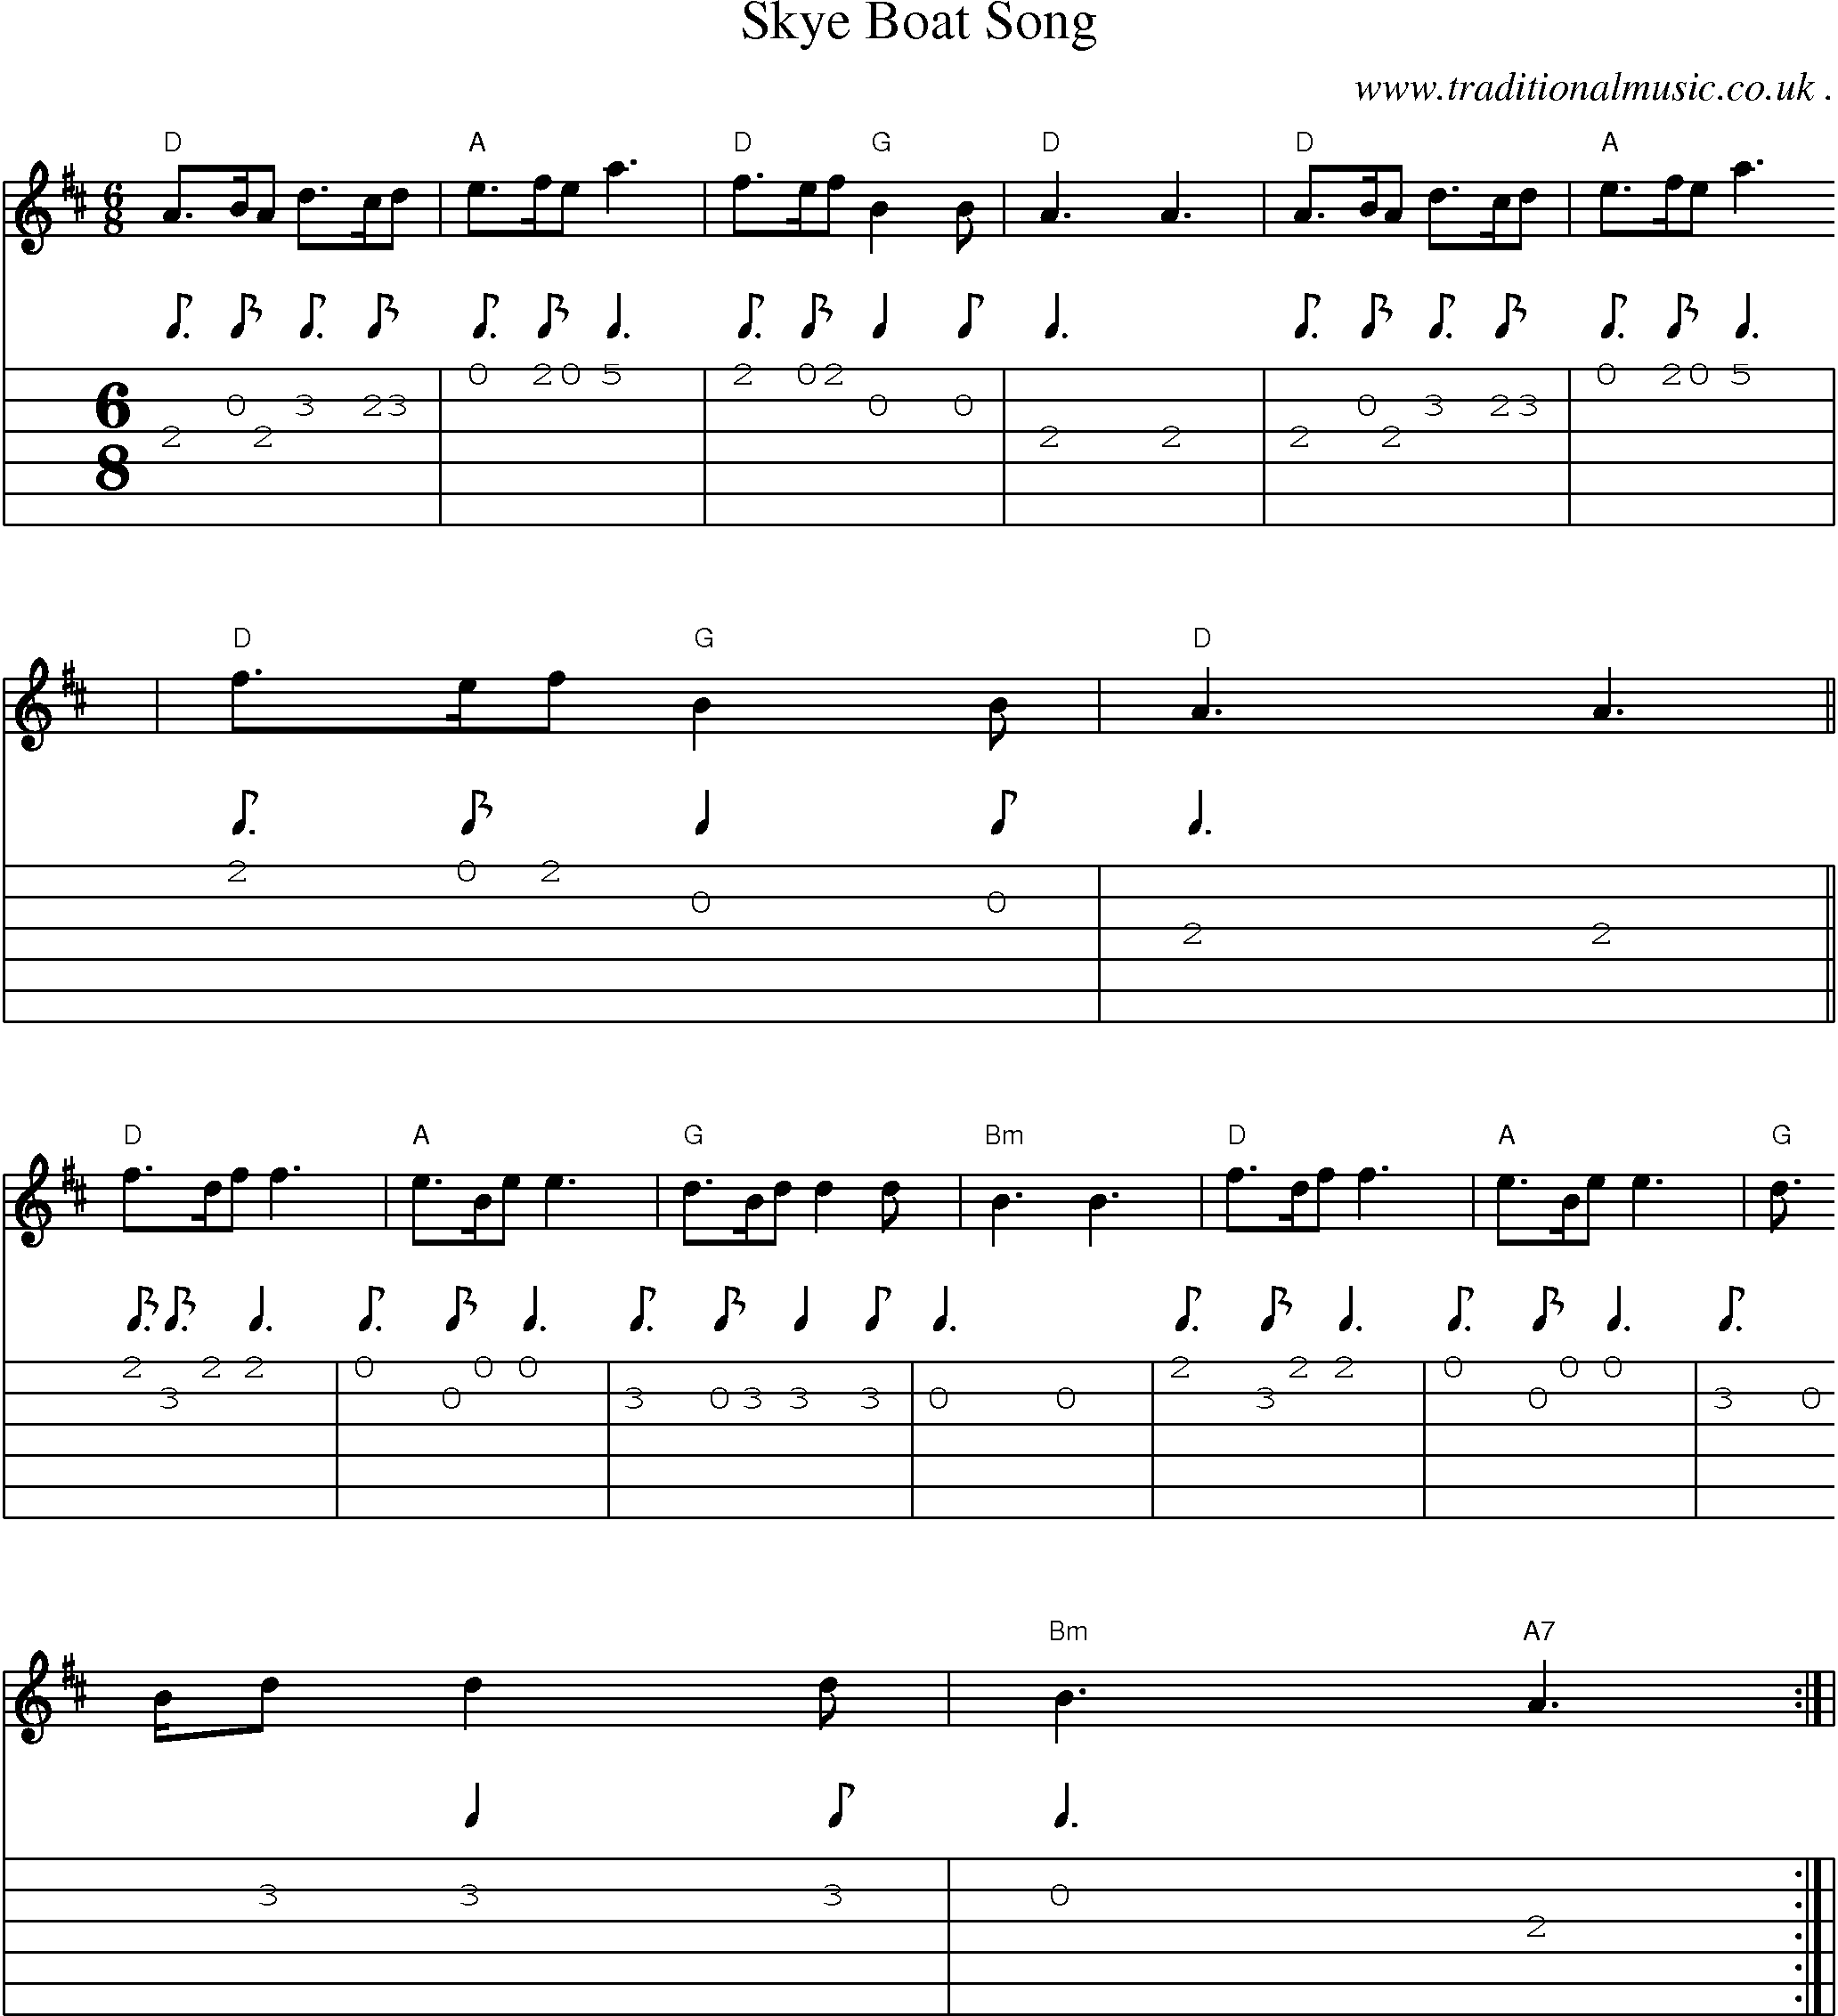 Sheet-music  score, Chords and Guitar Tabs for Skye Boat Song